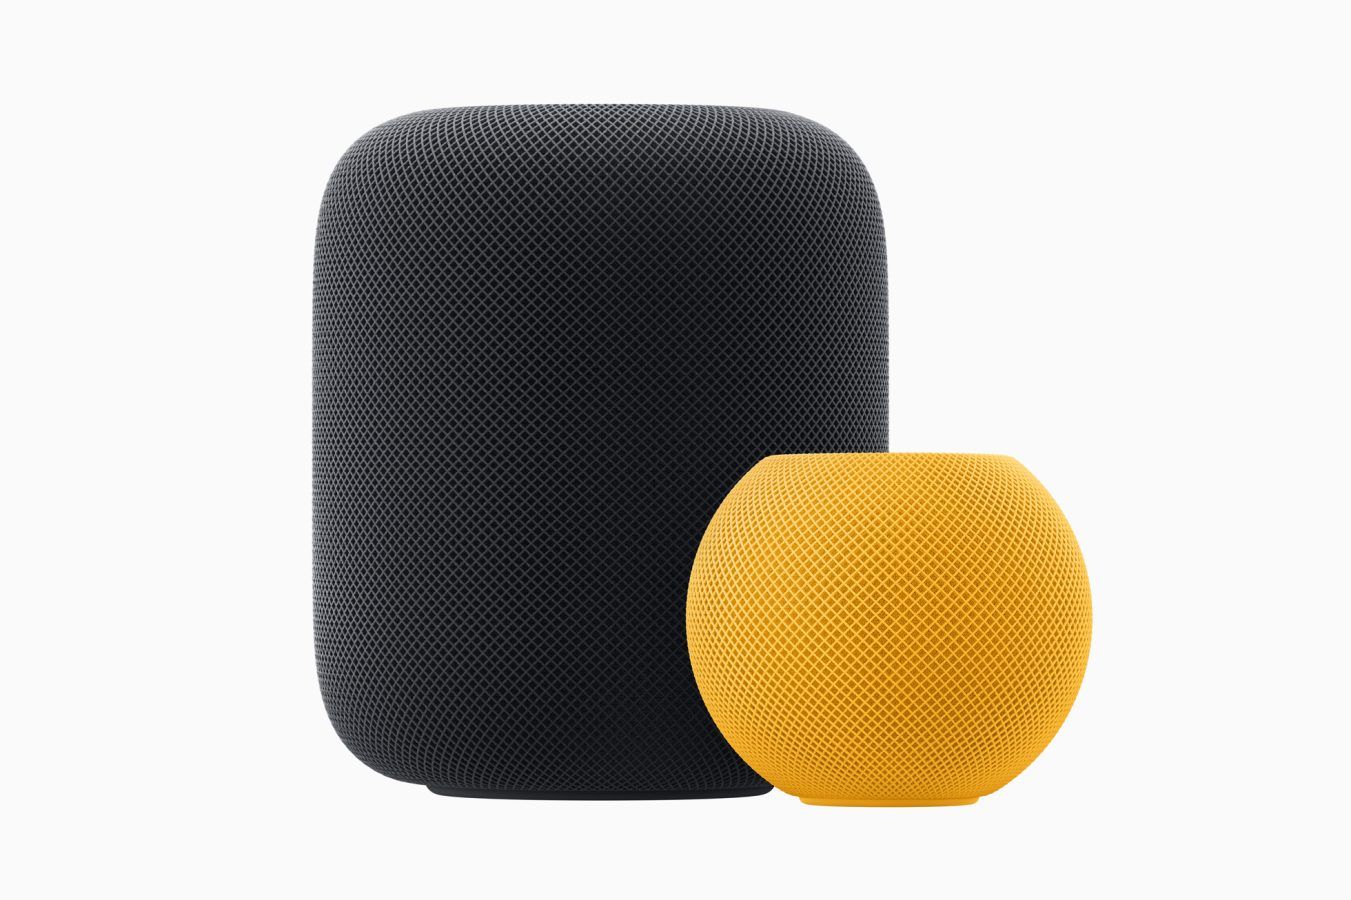 Review: Are the Apple it? HomePod and worth mini HomePod